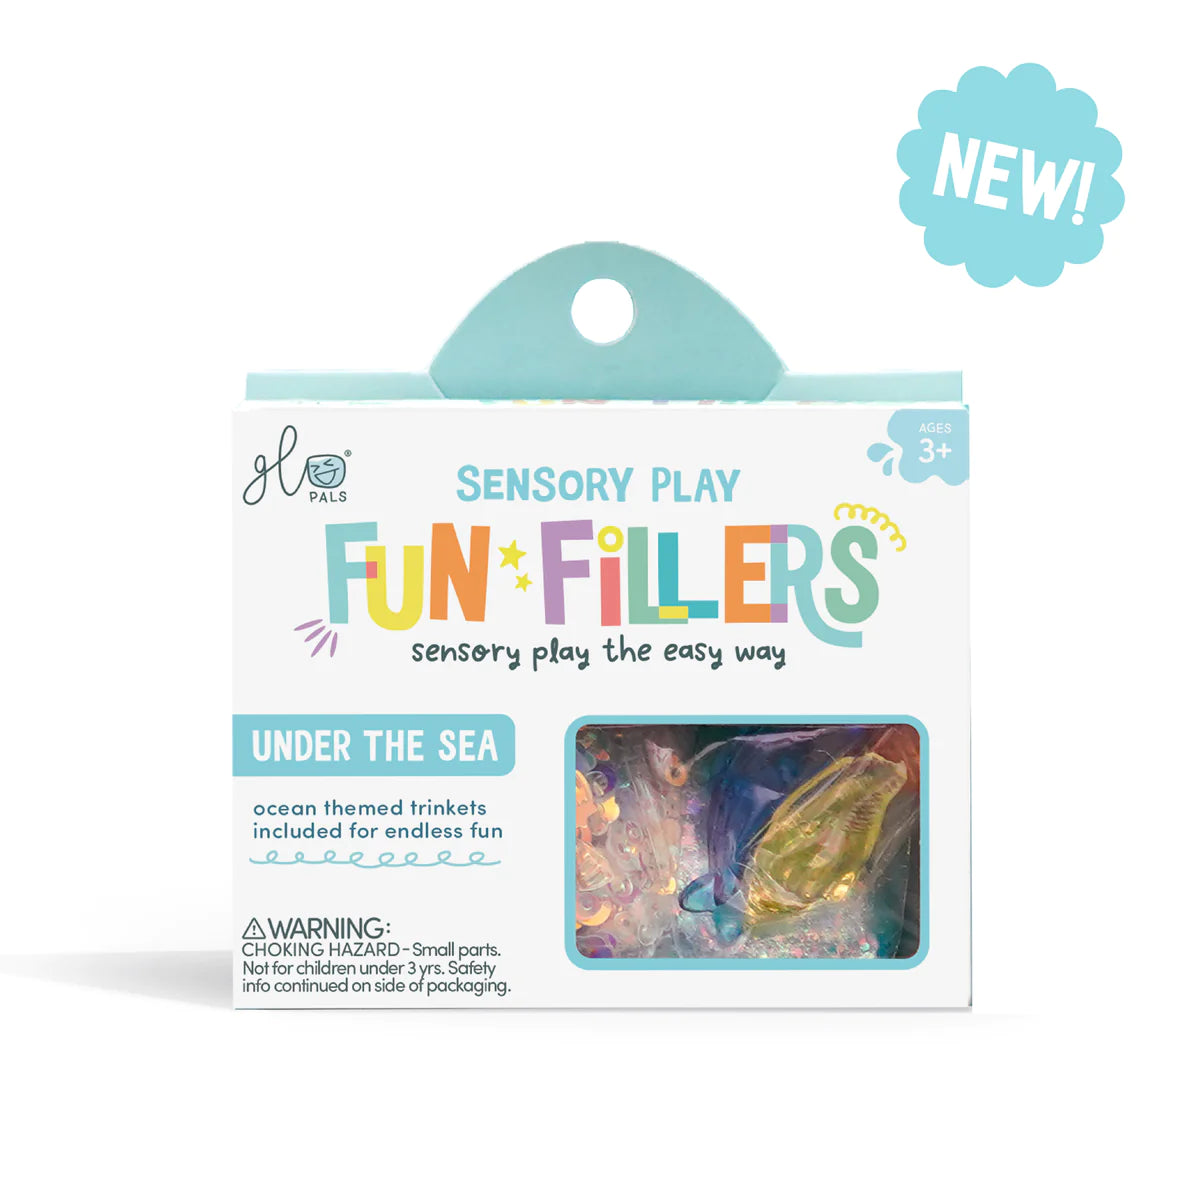 Glo Pals Fun Fillers | Under the Sea